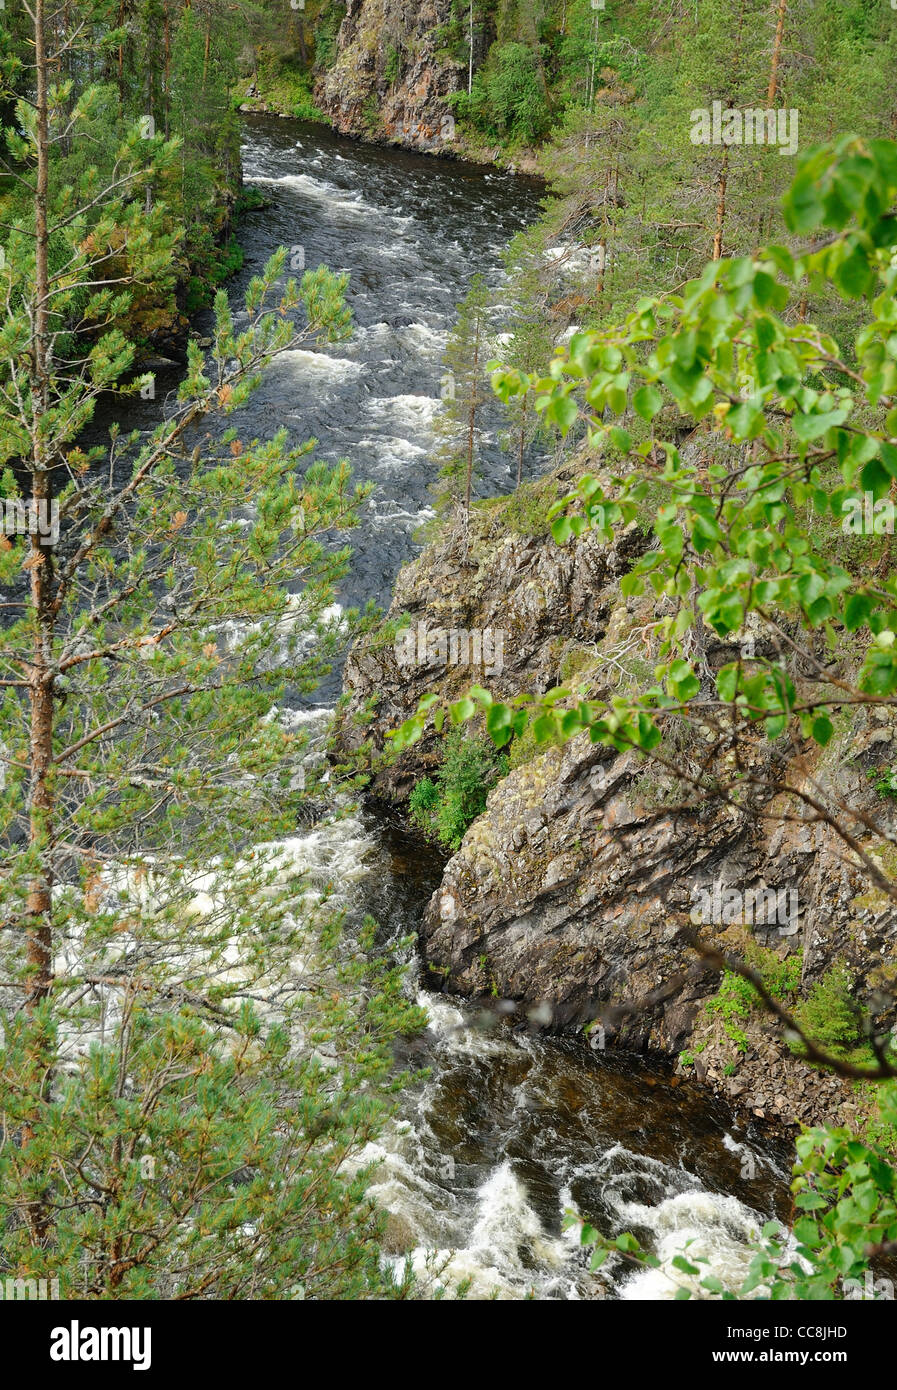 Rapid river with stony riversides in taiga forest Stock Photo